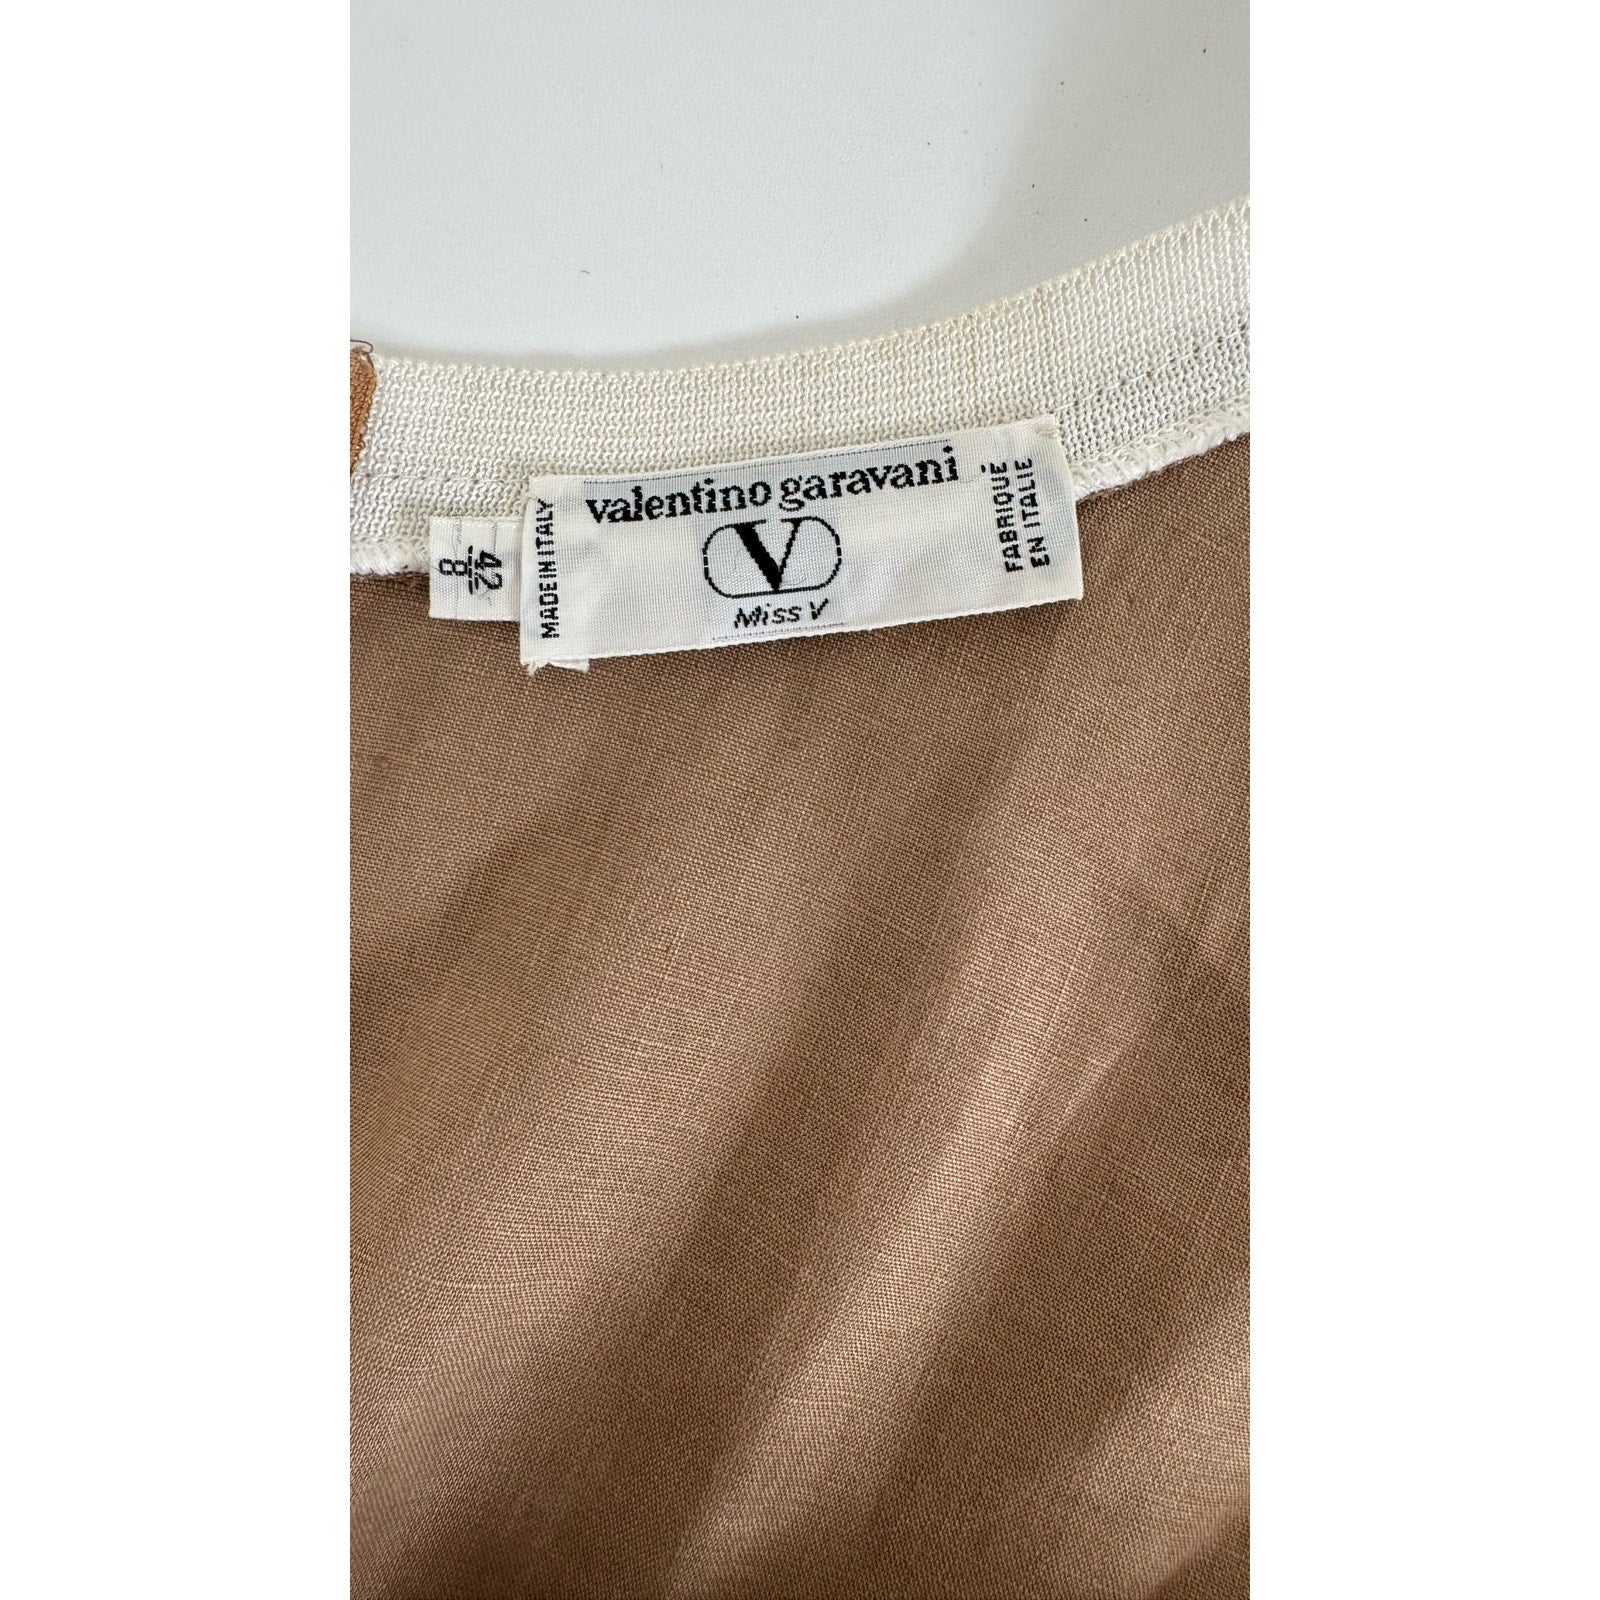 Close-up image of a clothing label with "Valentino Miss V" written on it, along with "Made in Italy" and "Fabrique en Italie." The label is attached to a light brown fabric with white stitching along the seam, hinting at a vintage Valentino Miss V Linen Tank Top crafted from 100% linen.